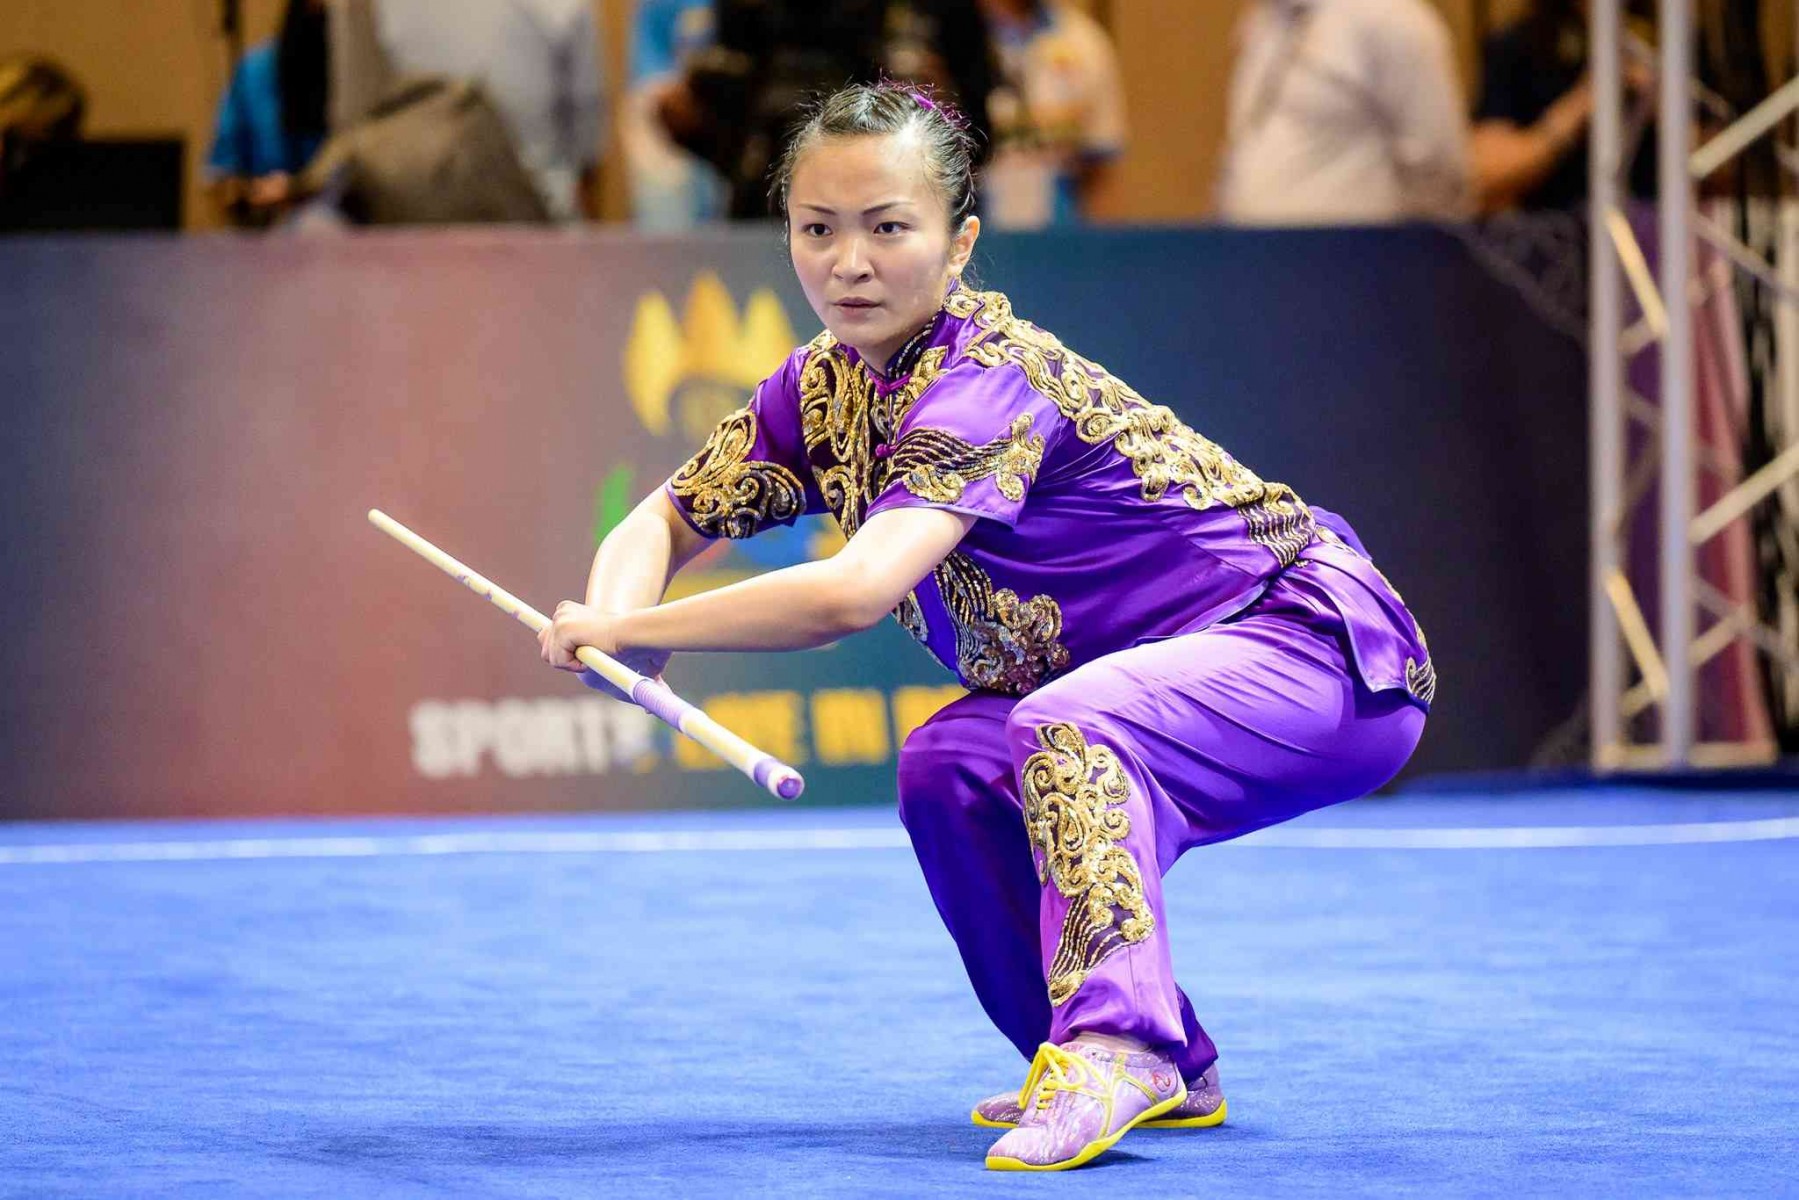 Kimberly Ong showed her finesse with her strong and confident moves at the women’s wushu competition. (Photo: Singapore National Olympic Council/ Weixiang Lim)
